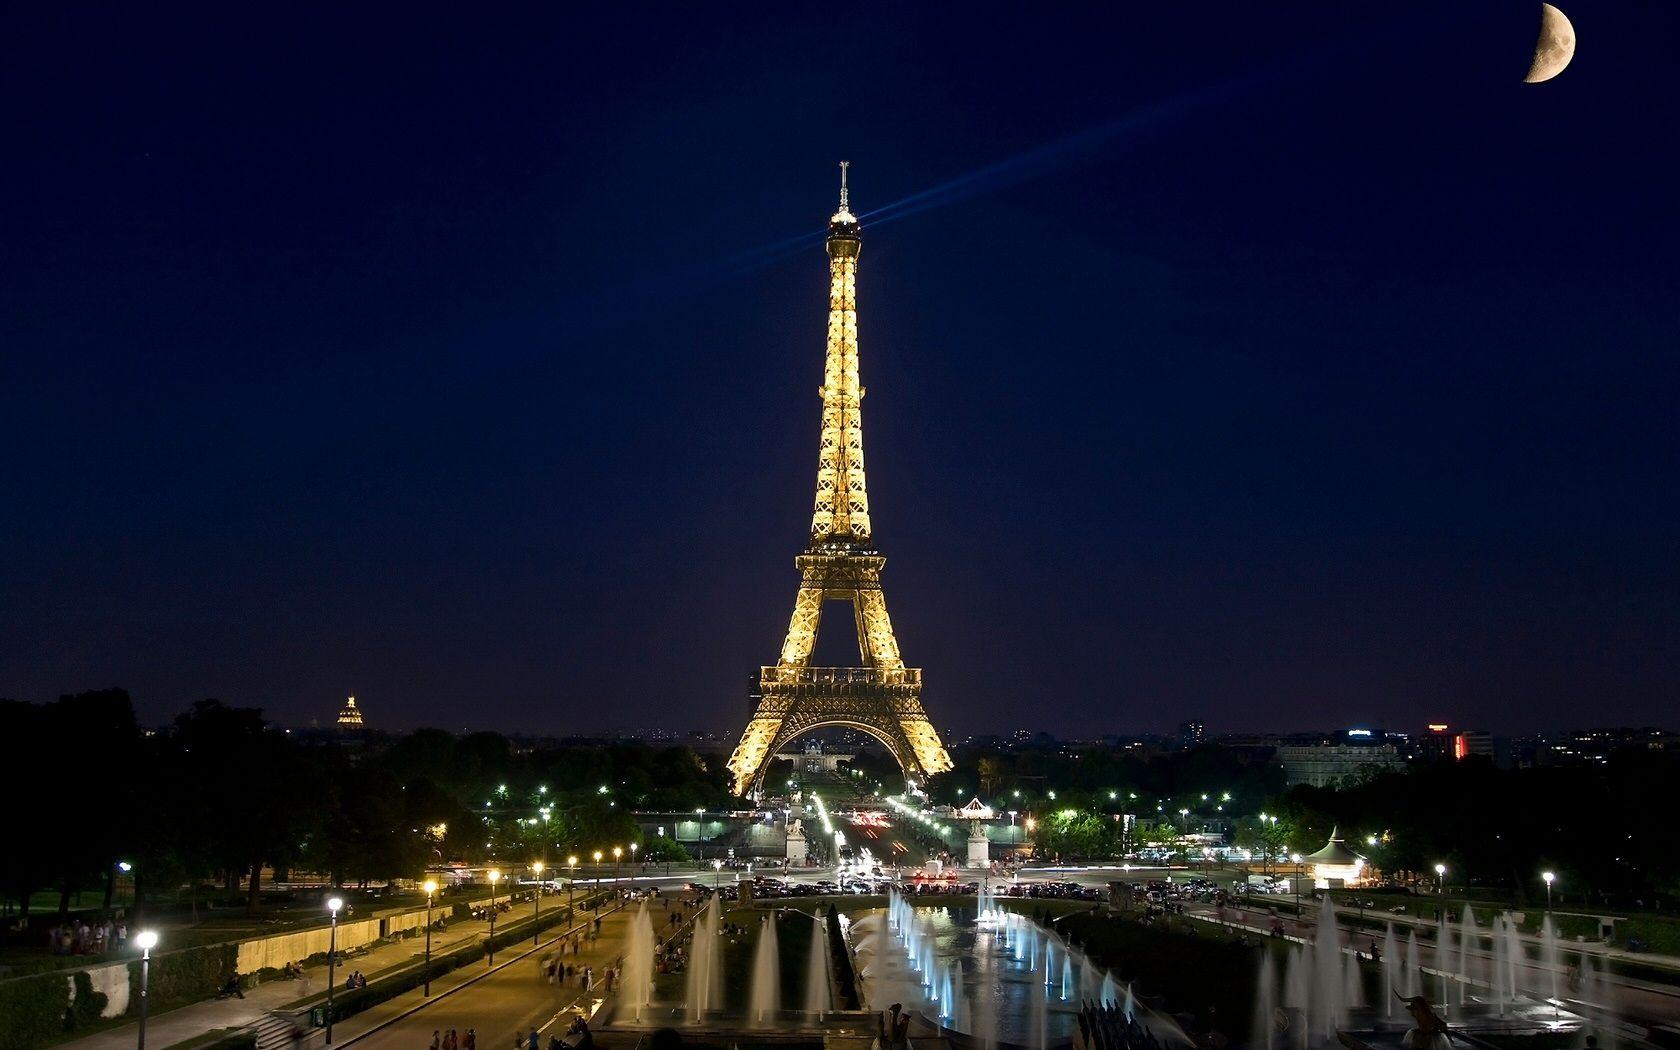 Eiffel Tower At Night Wallpaper (Picture)